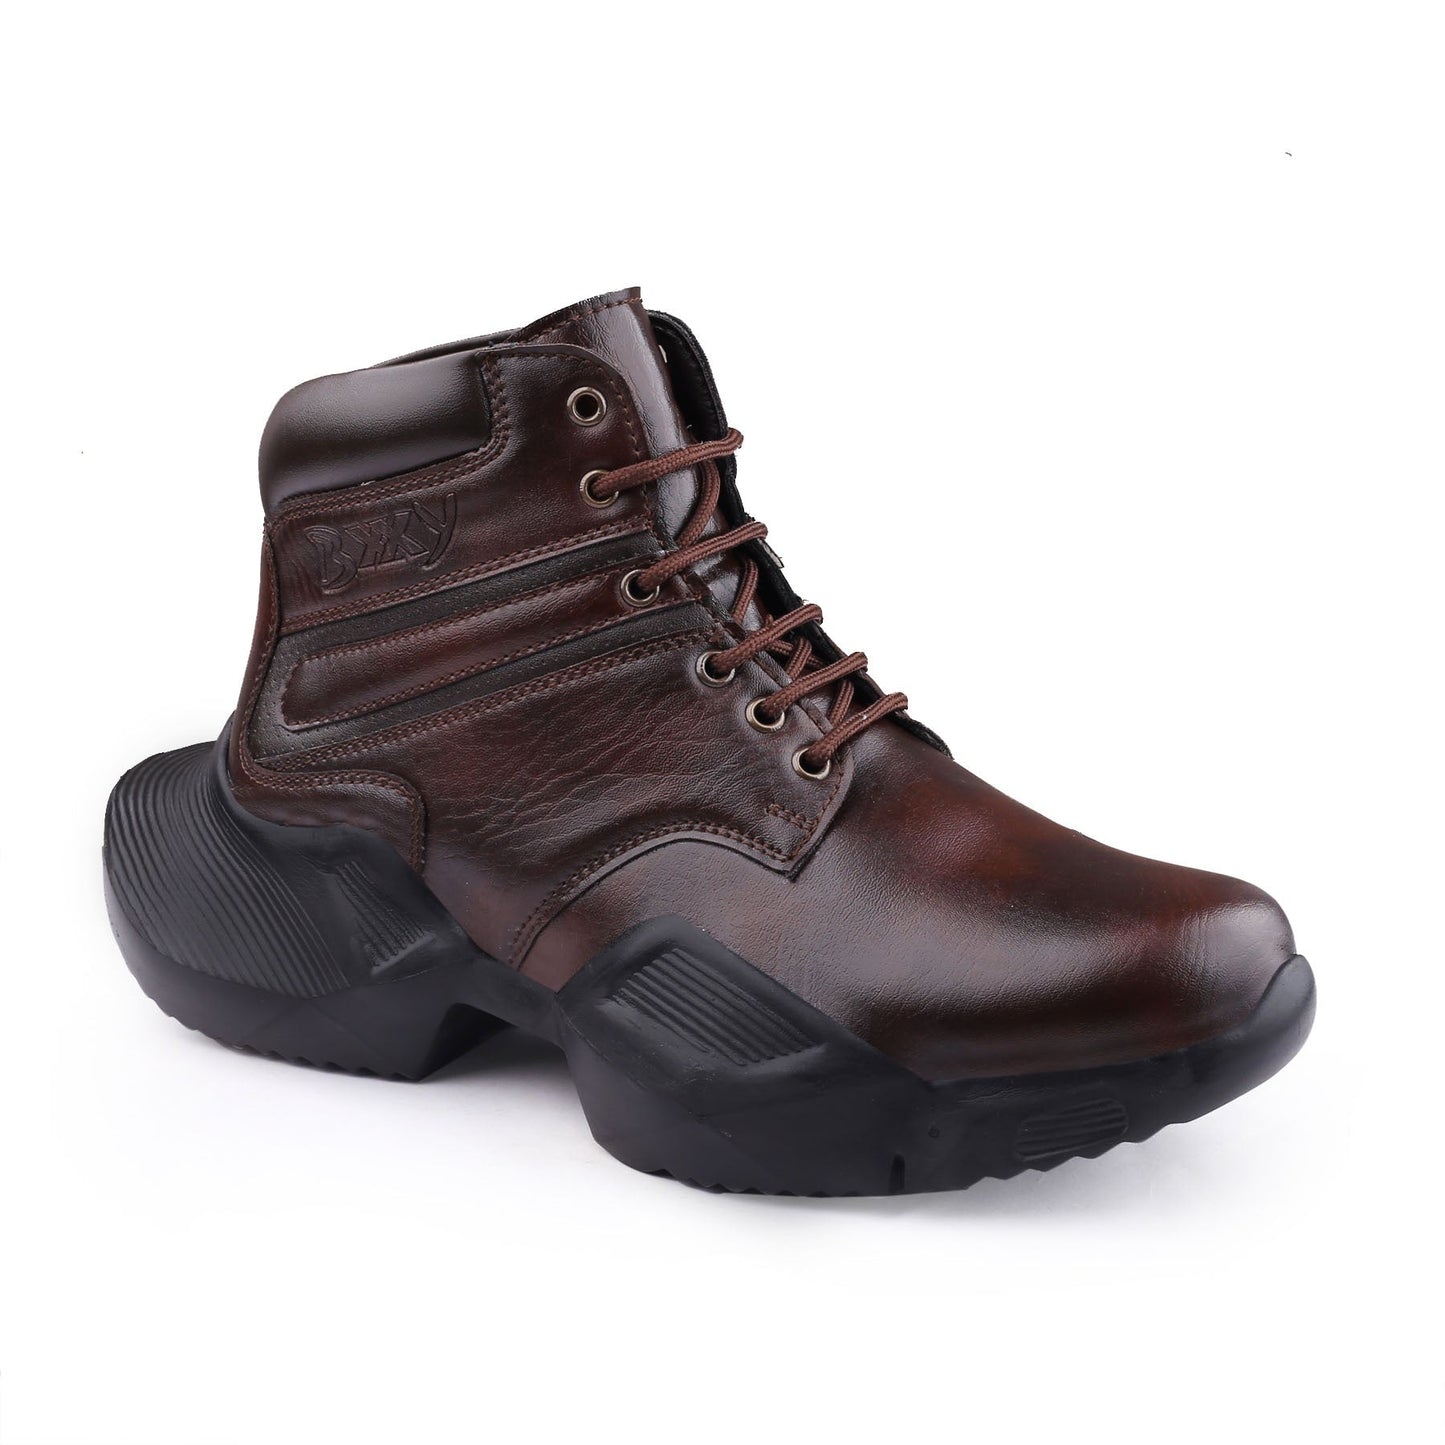 Men's 4 Inch Hidden Height Increasing Faux Leather Material Casual Ankle Lace-Up Light Weight Shoes.